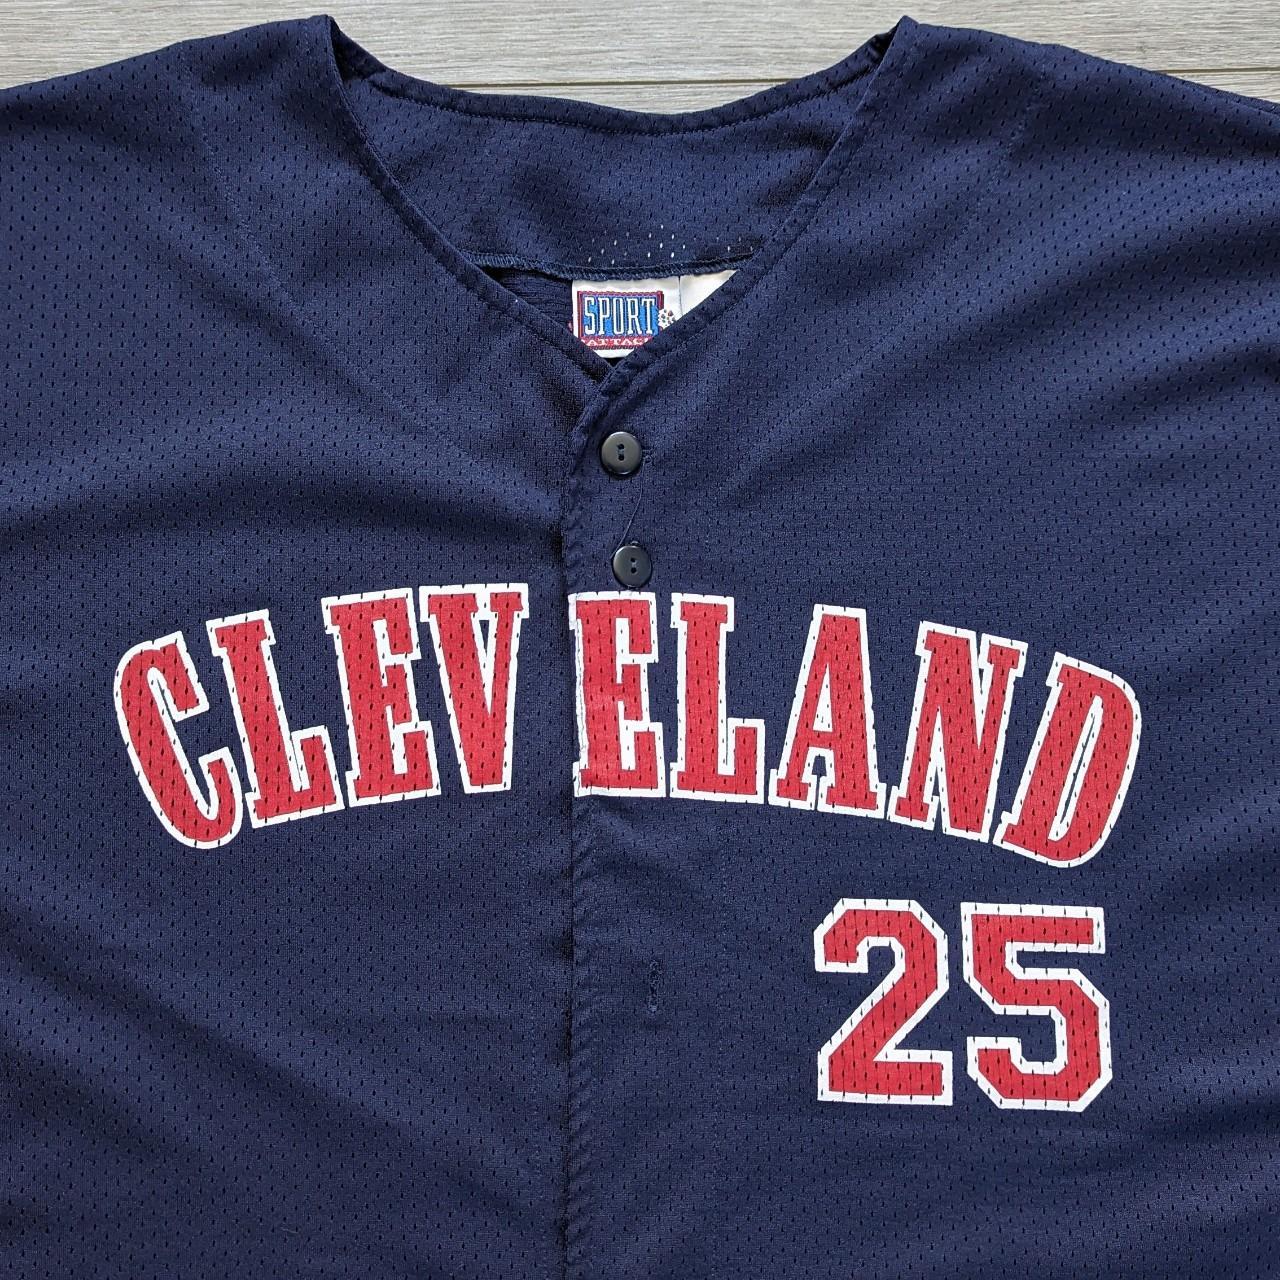 2000-02 CLEVELAND INDIANS THOME #25 MAJESTIC JERSEY (ALTERNATE) XL -  Classic American Sports